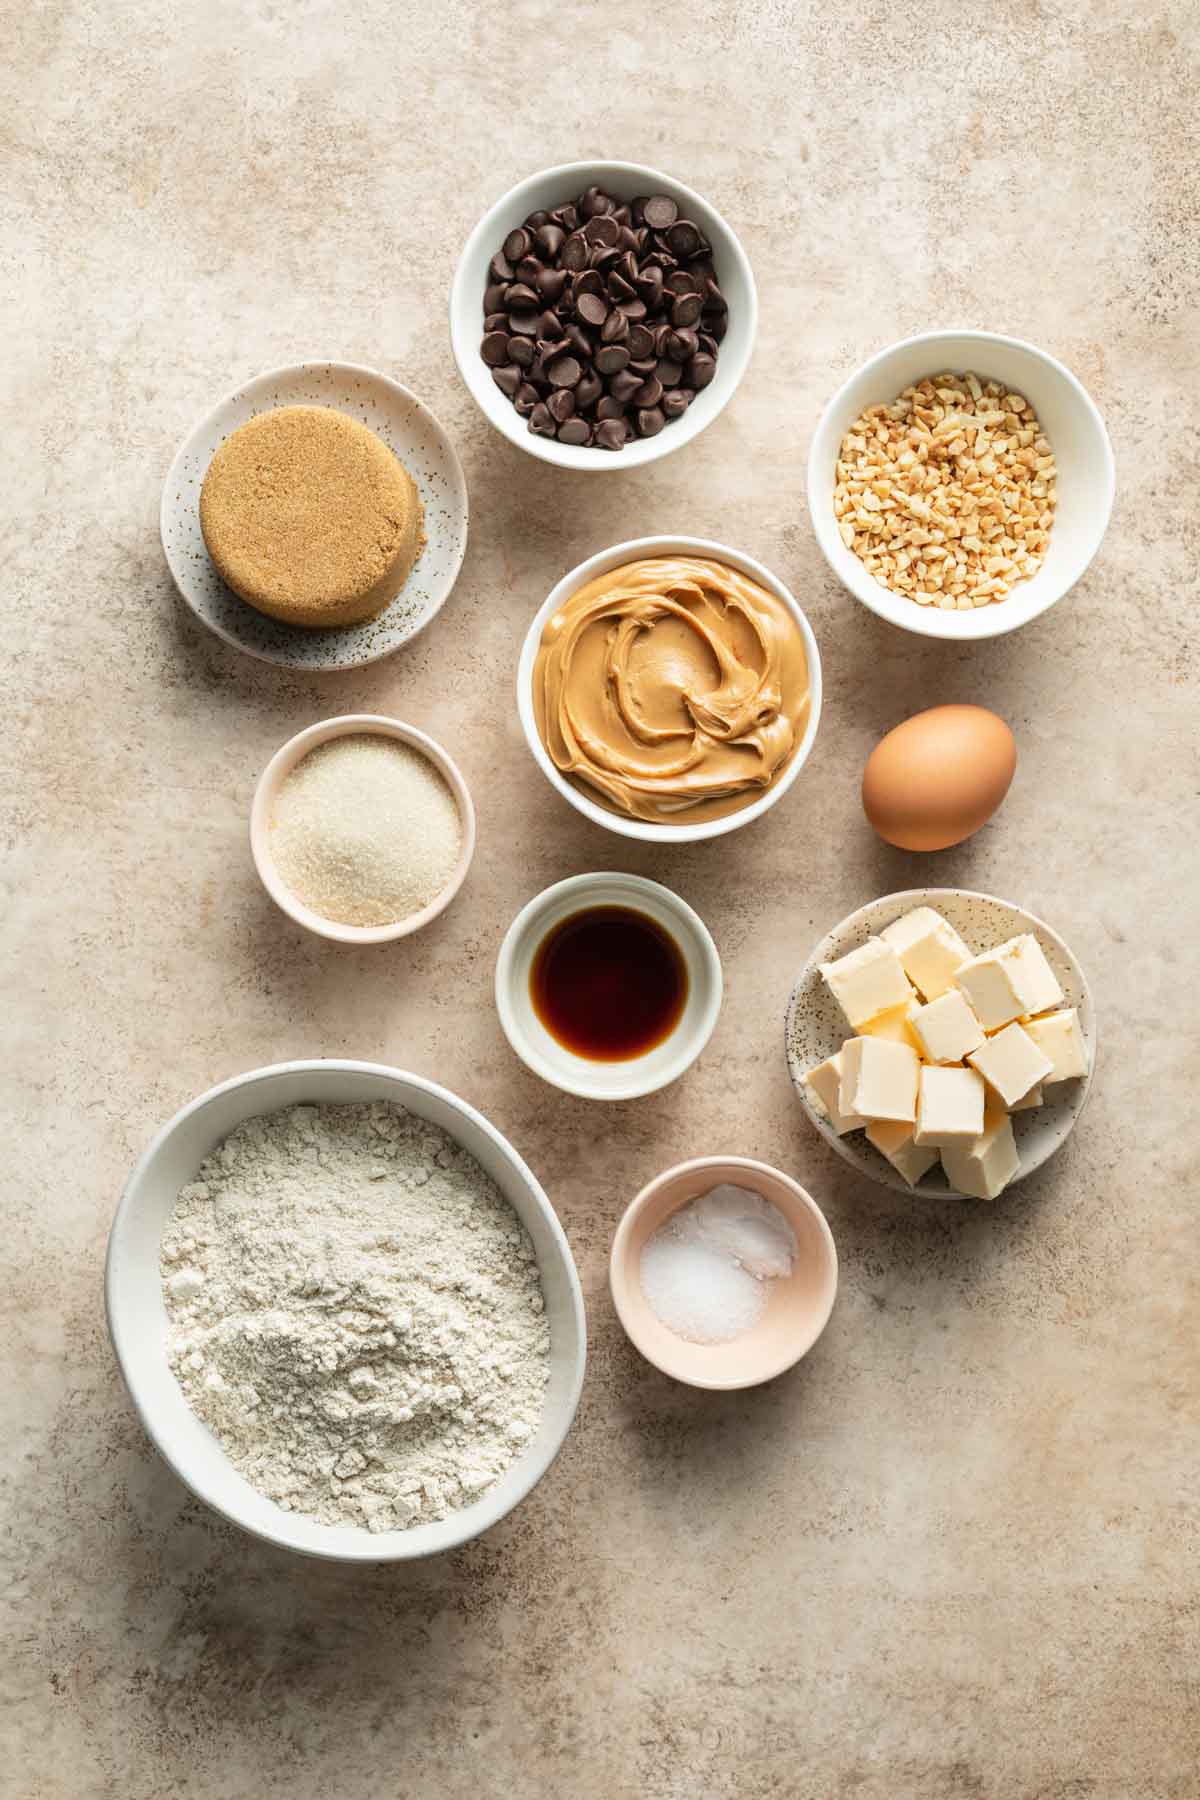 Ingredients to make oat flour chocolate chip cookies.